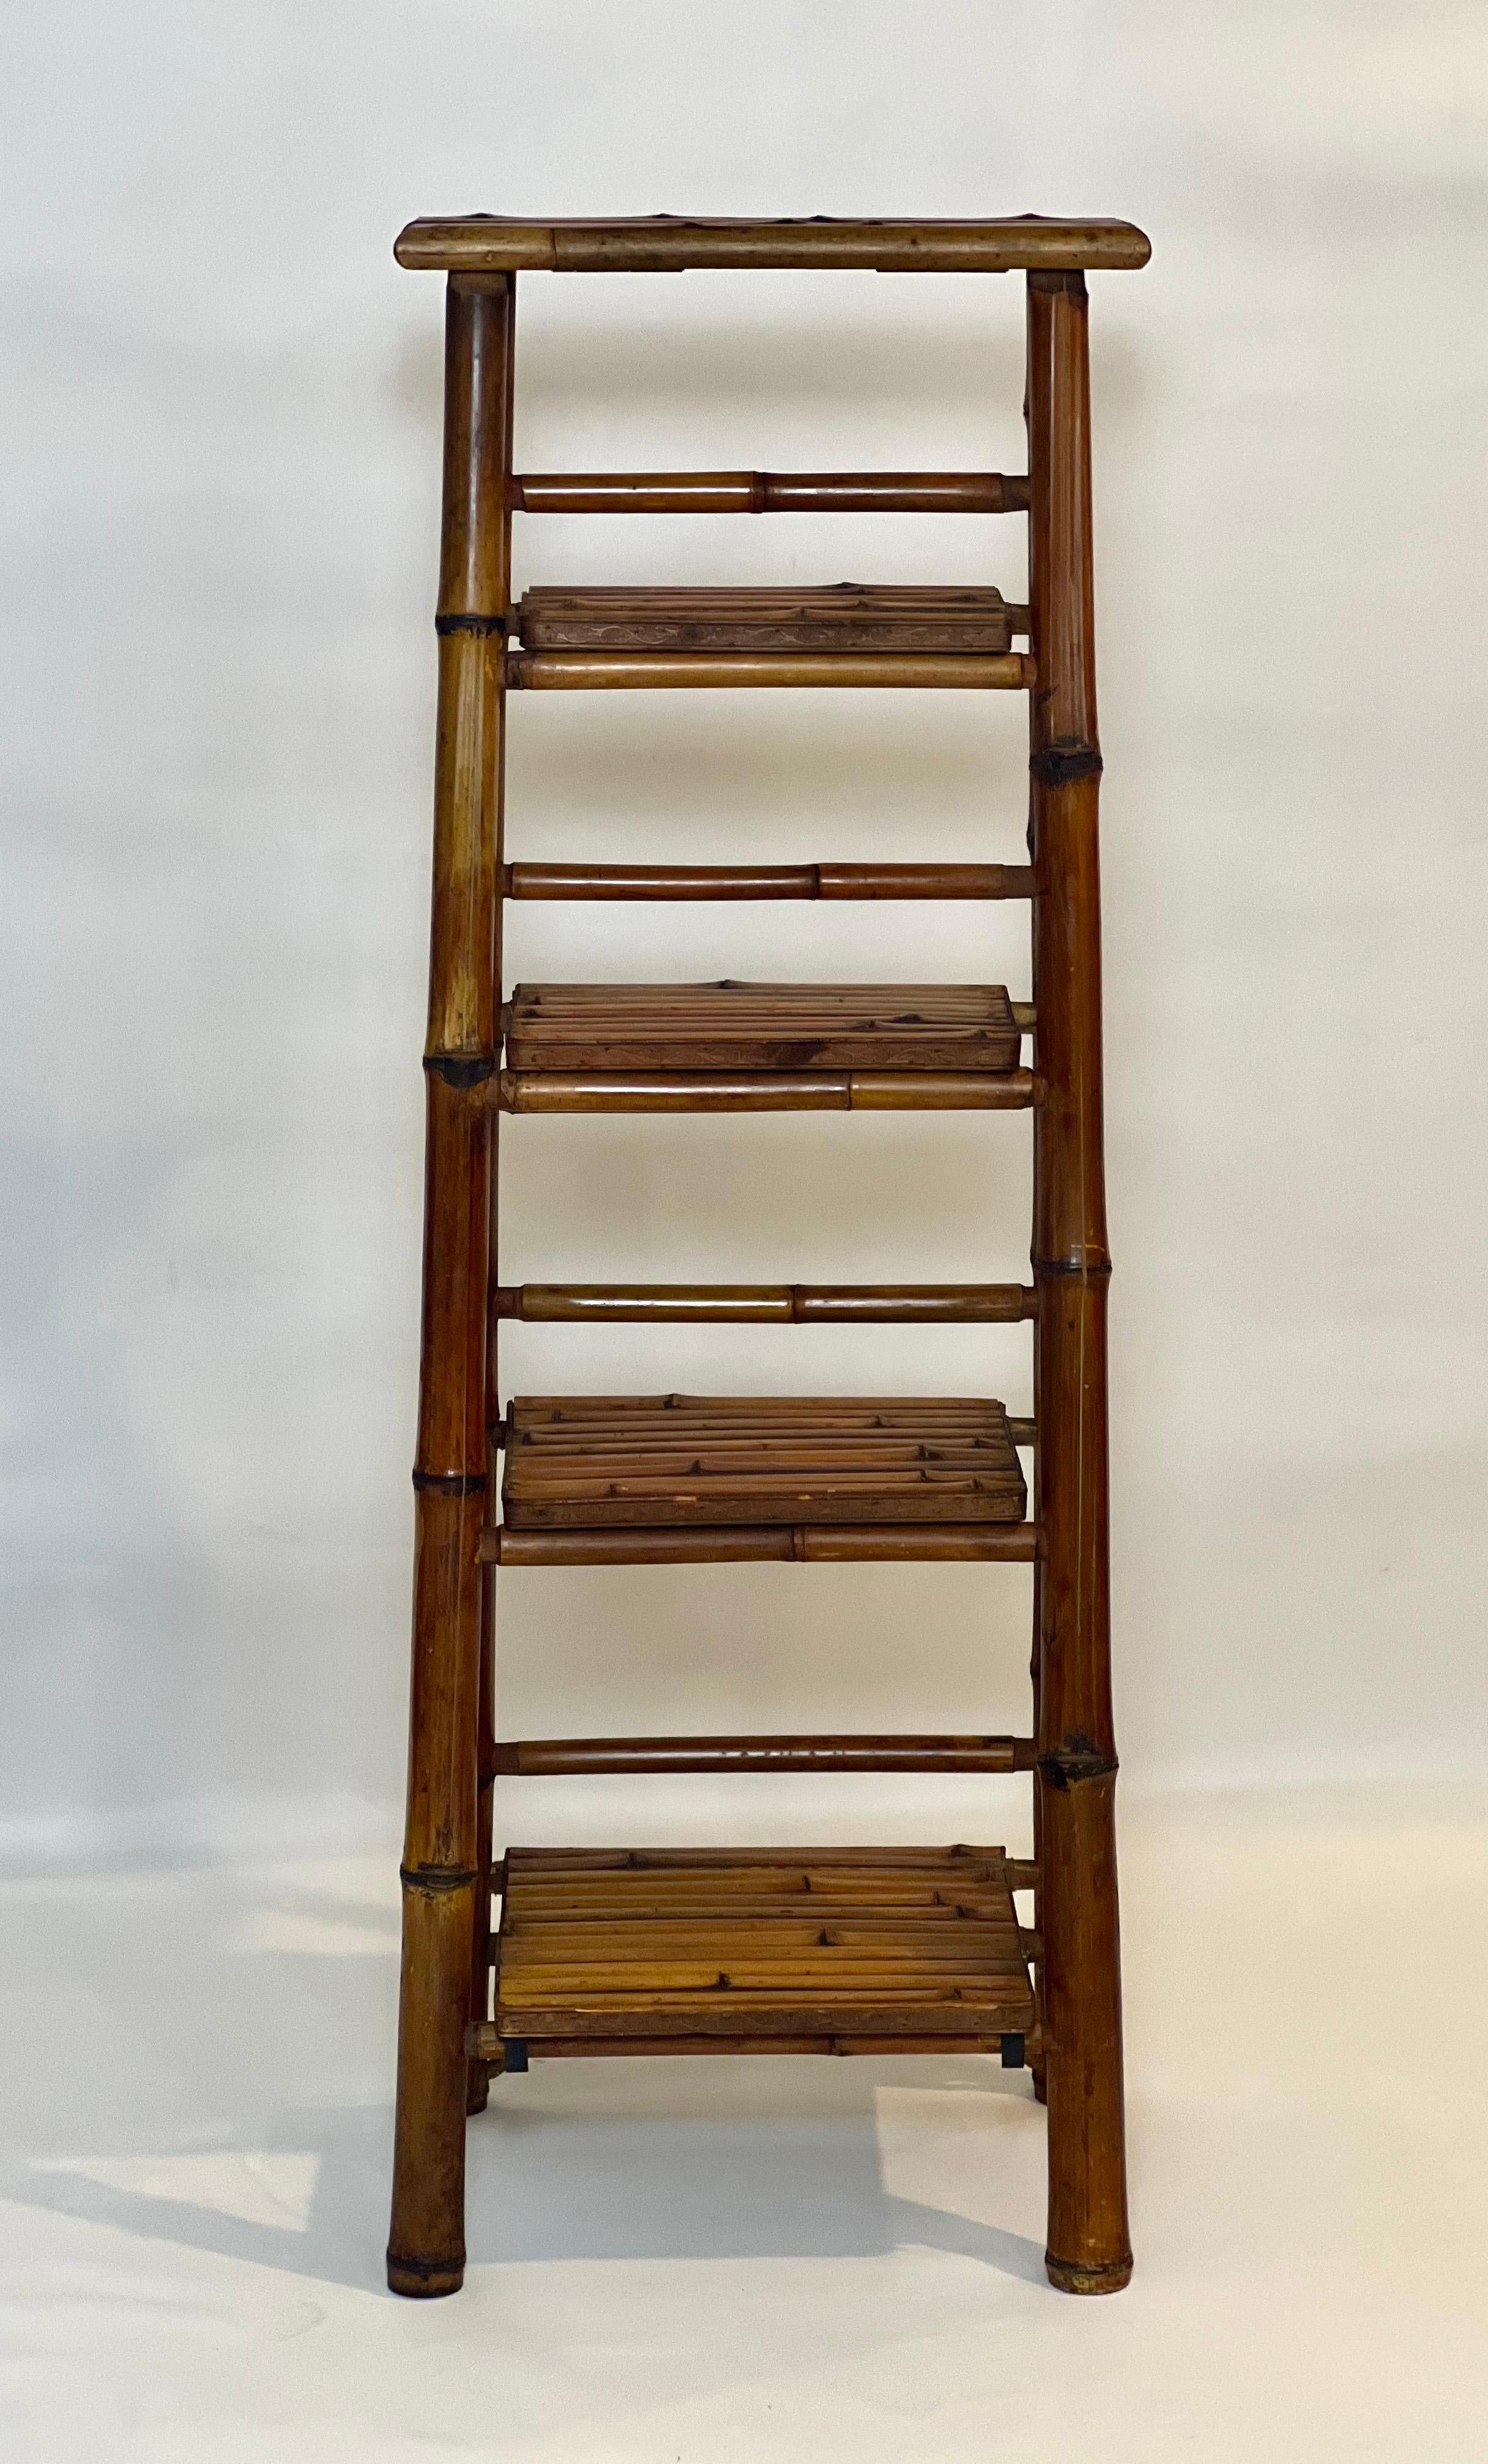 Vintage Bamboo A-Frame Etagere or Book Stand 2